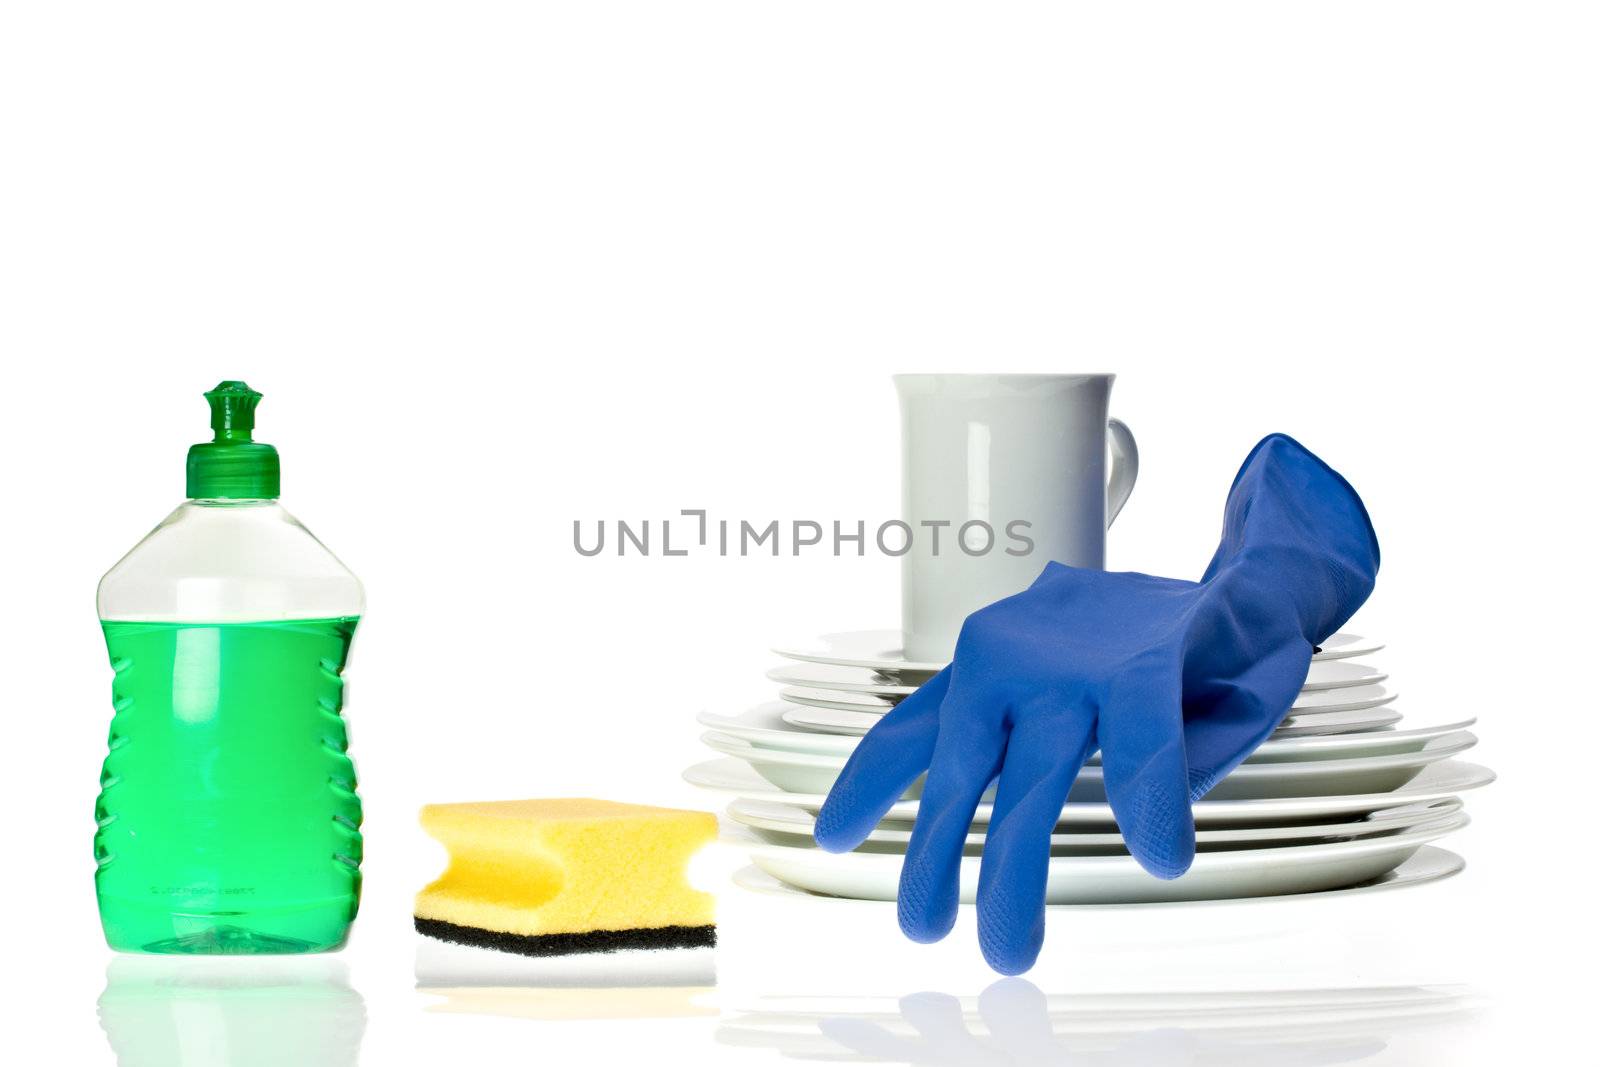 dinnerware and cleaning utensils isolated on white background